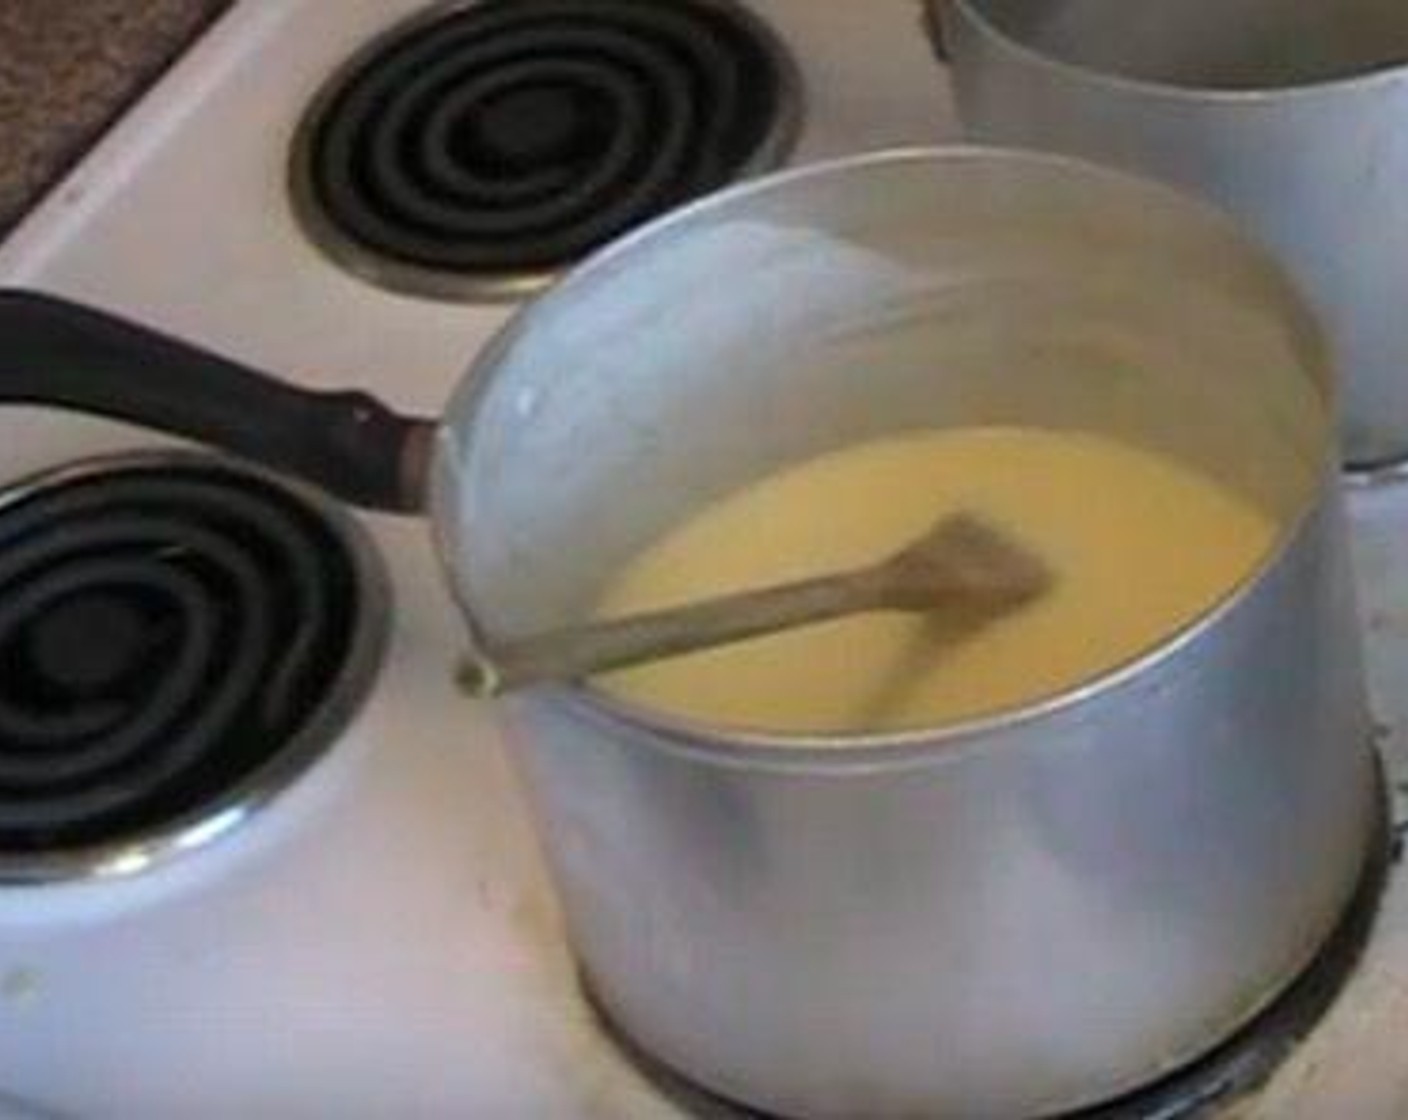 step 1 In a saucepan, melt Butter (2 Tbsp) Add All-Purpose Flour (3 Tbsp) and stir to combine over a low heat. Add Milk (3 cups) and stir until mixture thickens, about 5 minutes.